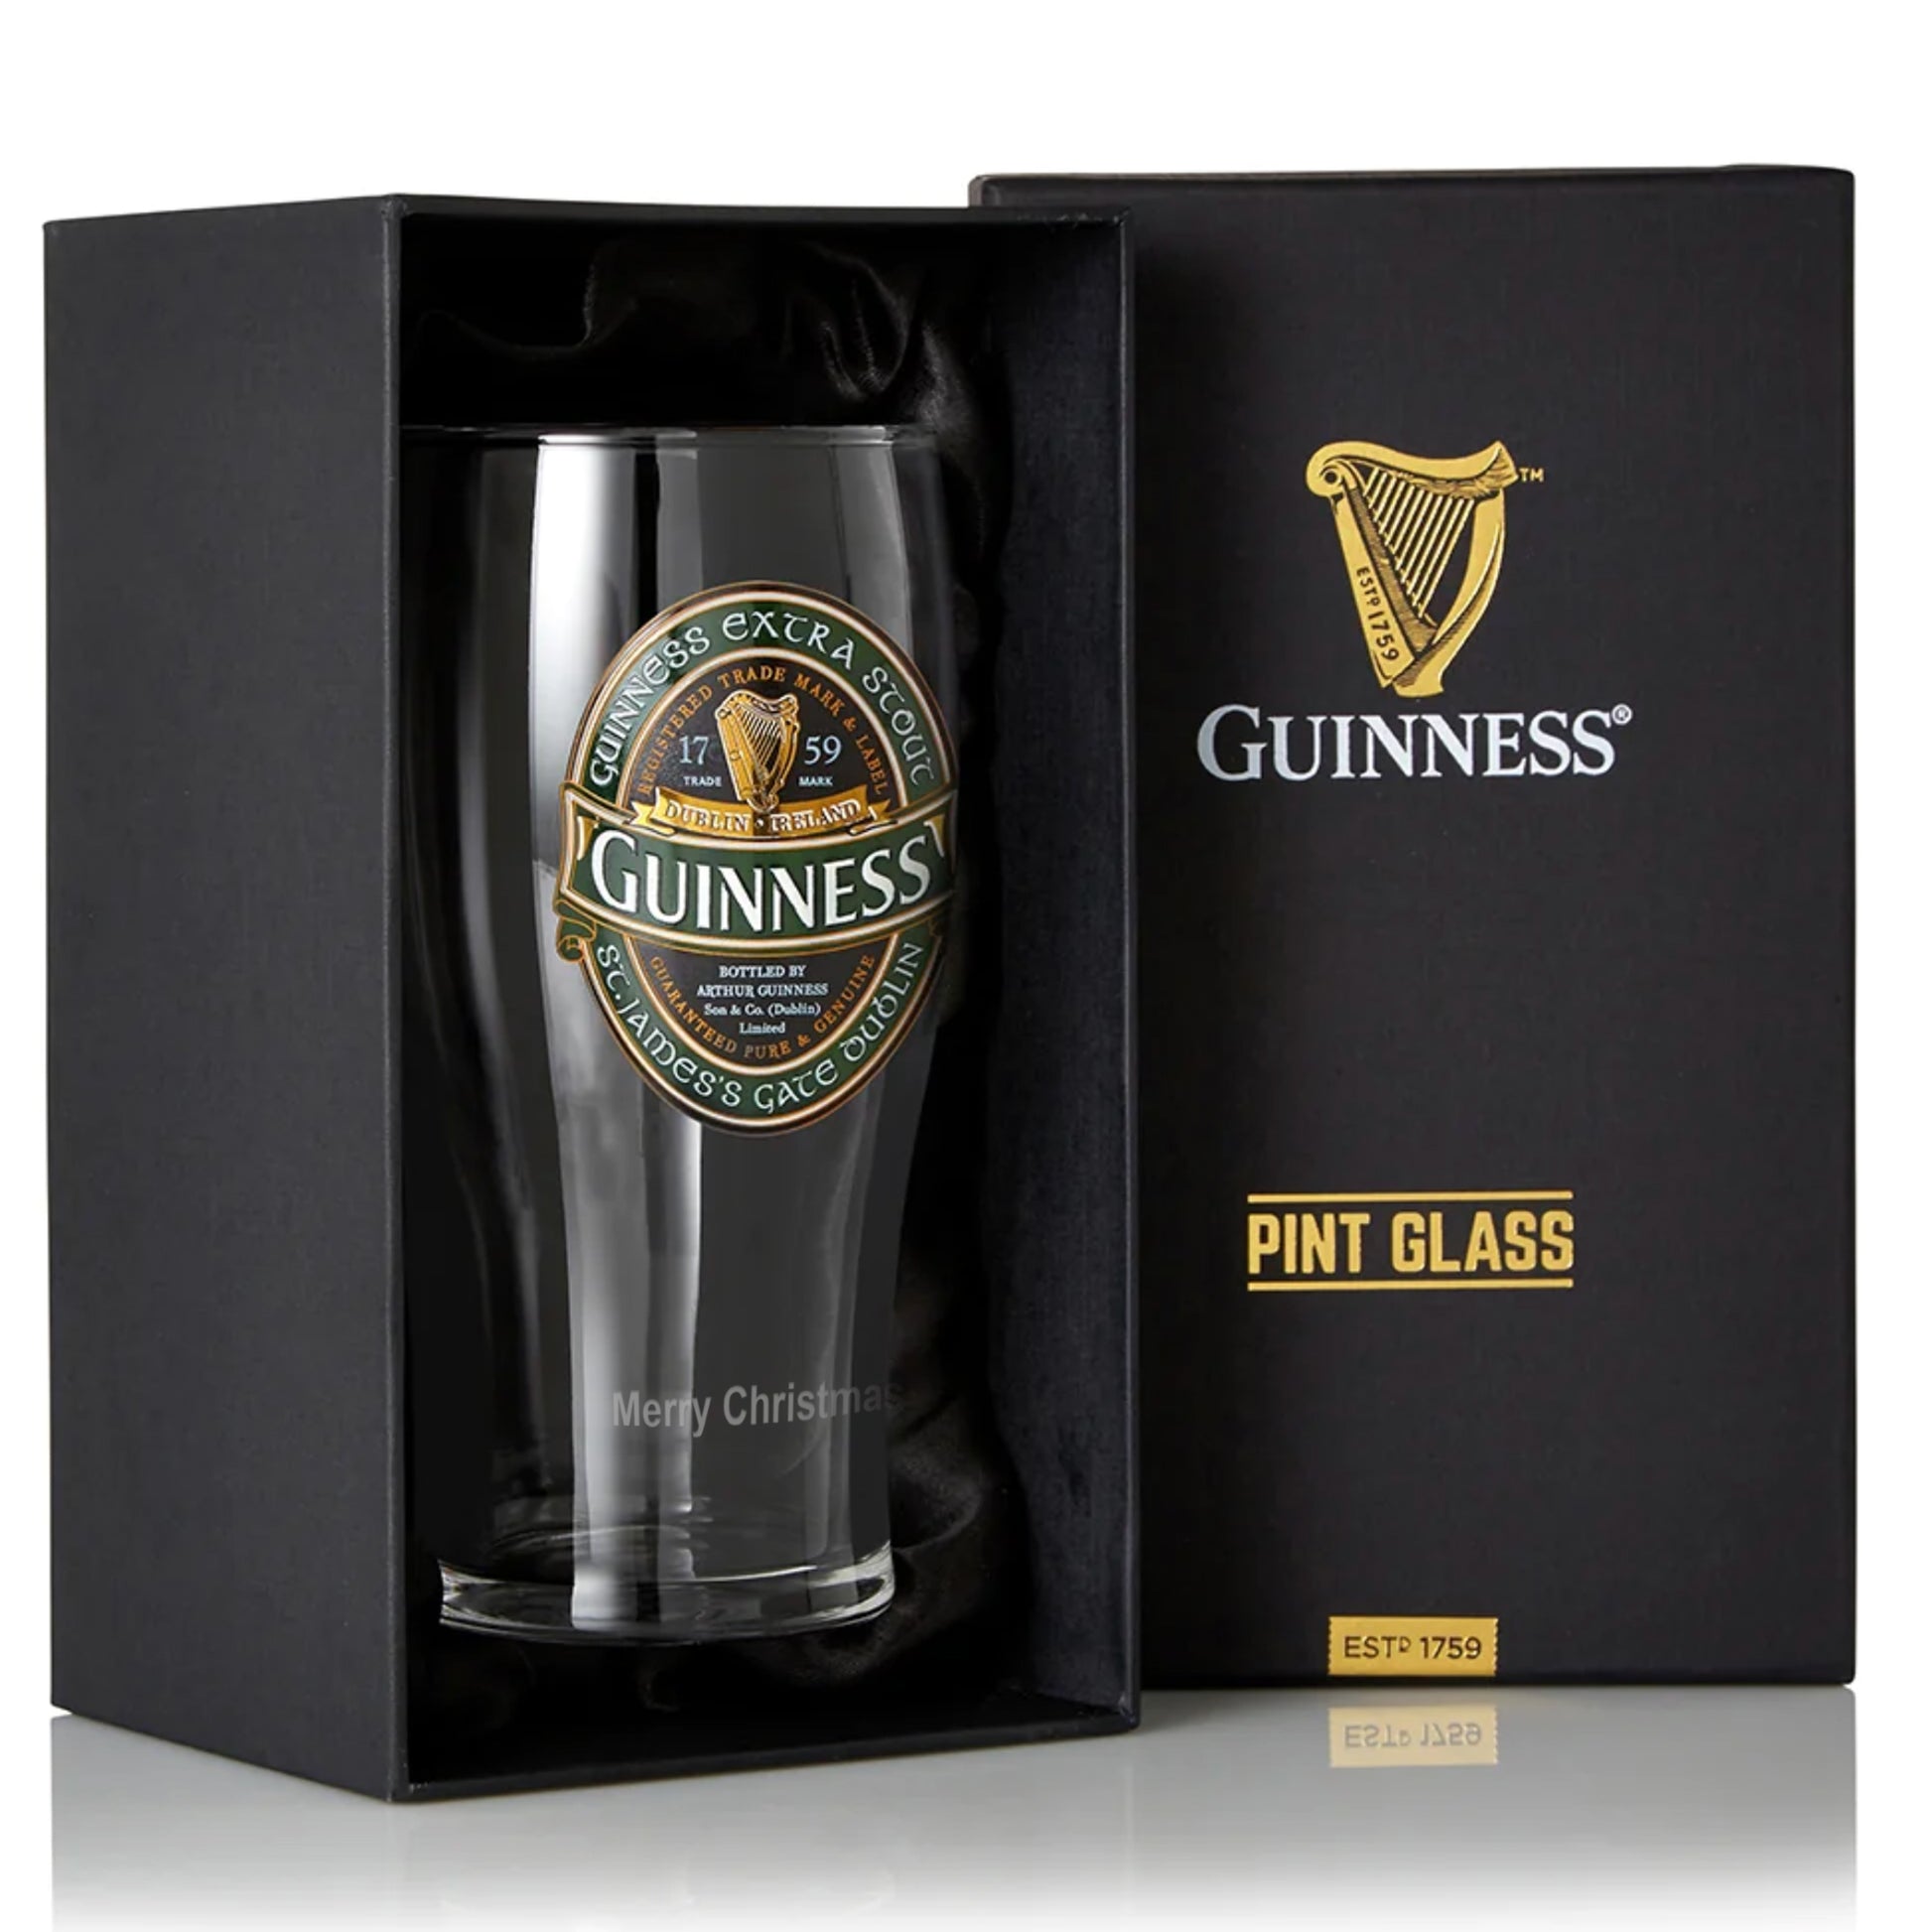 Guinness Ireland Collection Guinness pint glass in a box.